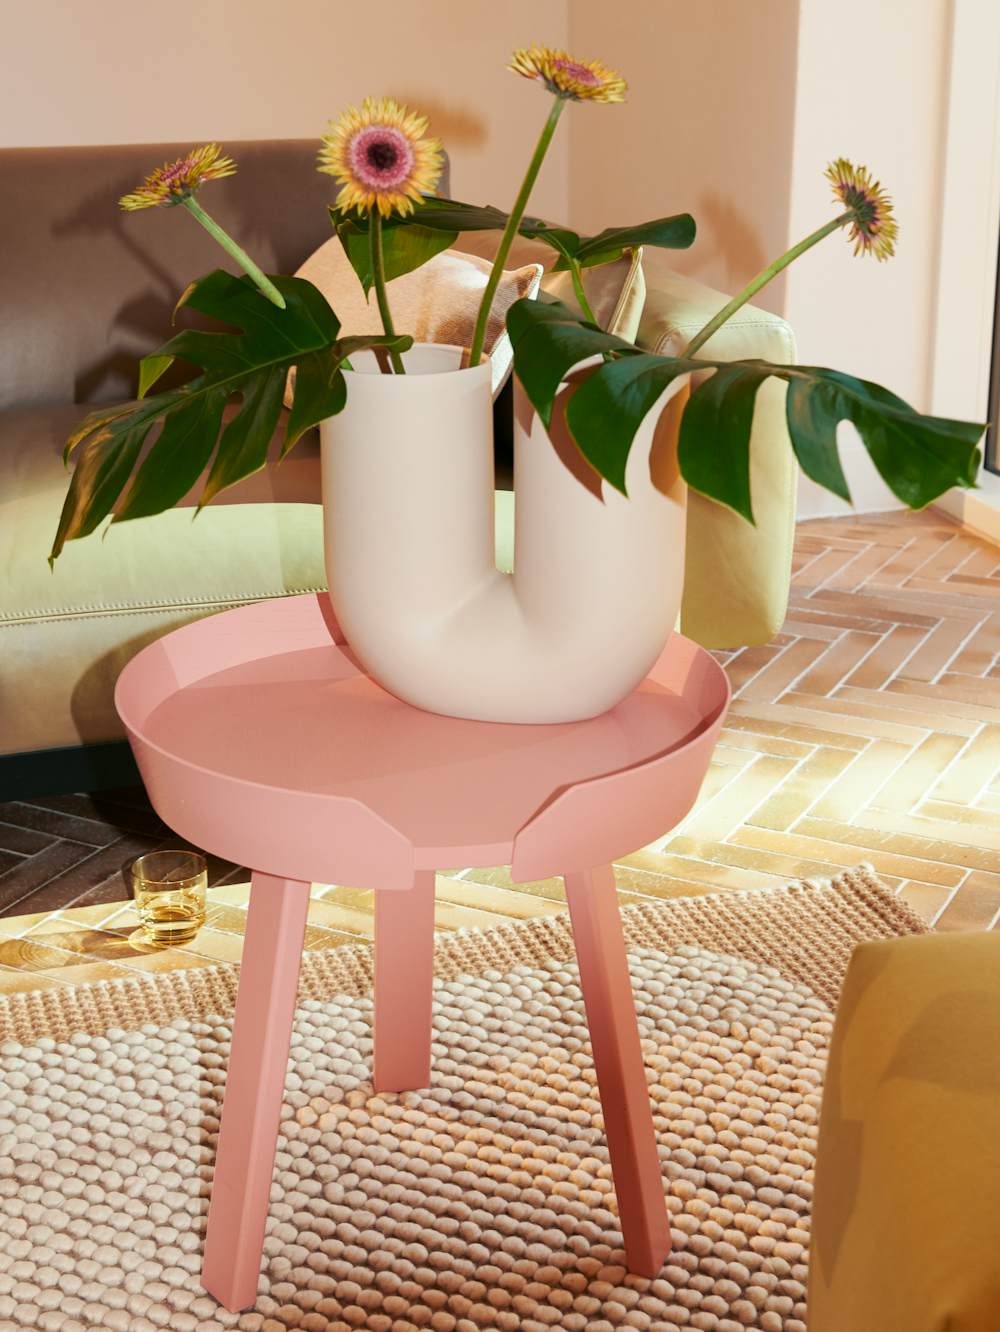 Around Coffee Table with Kink Vase